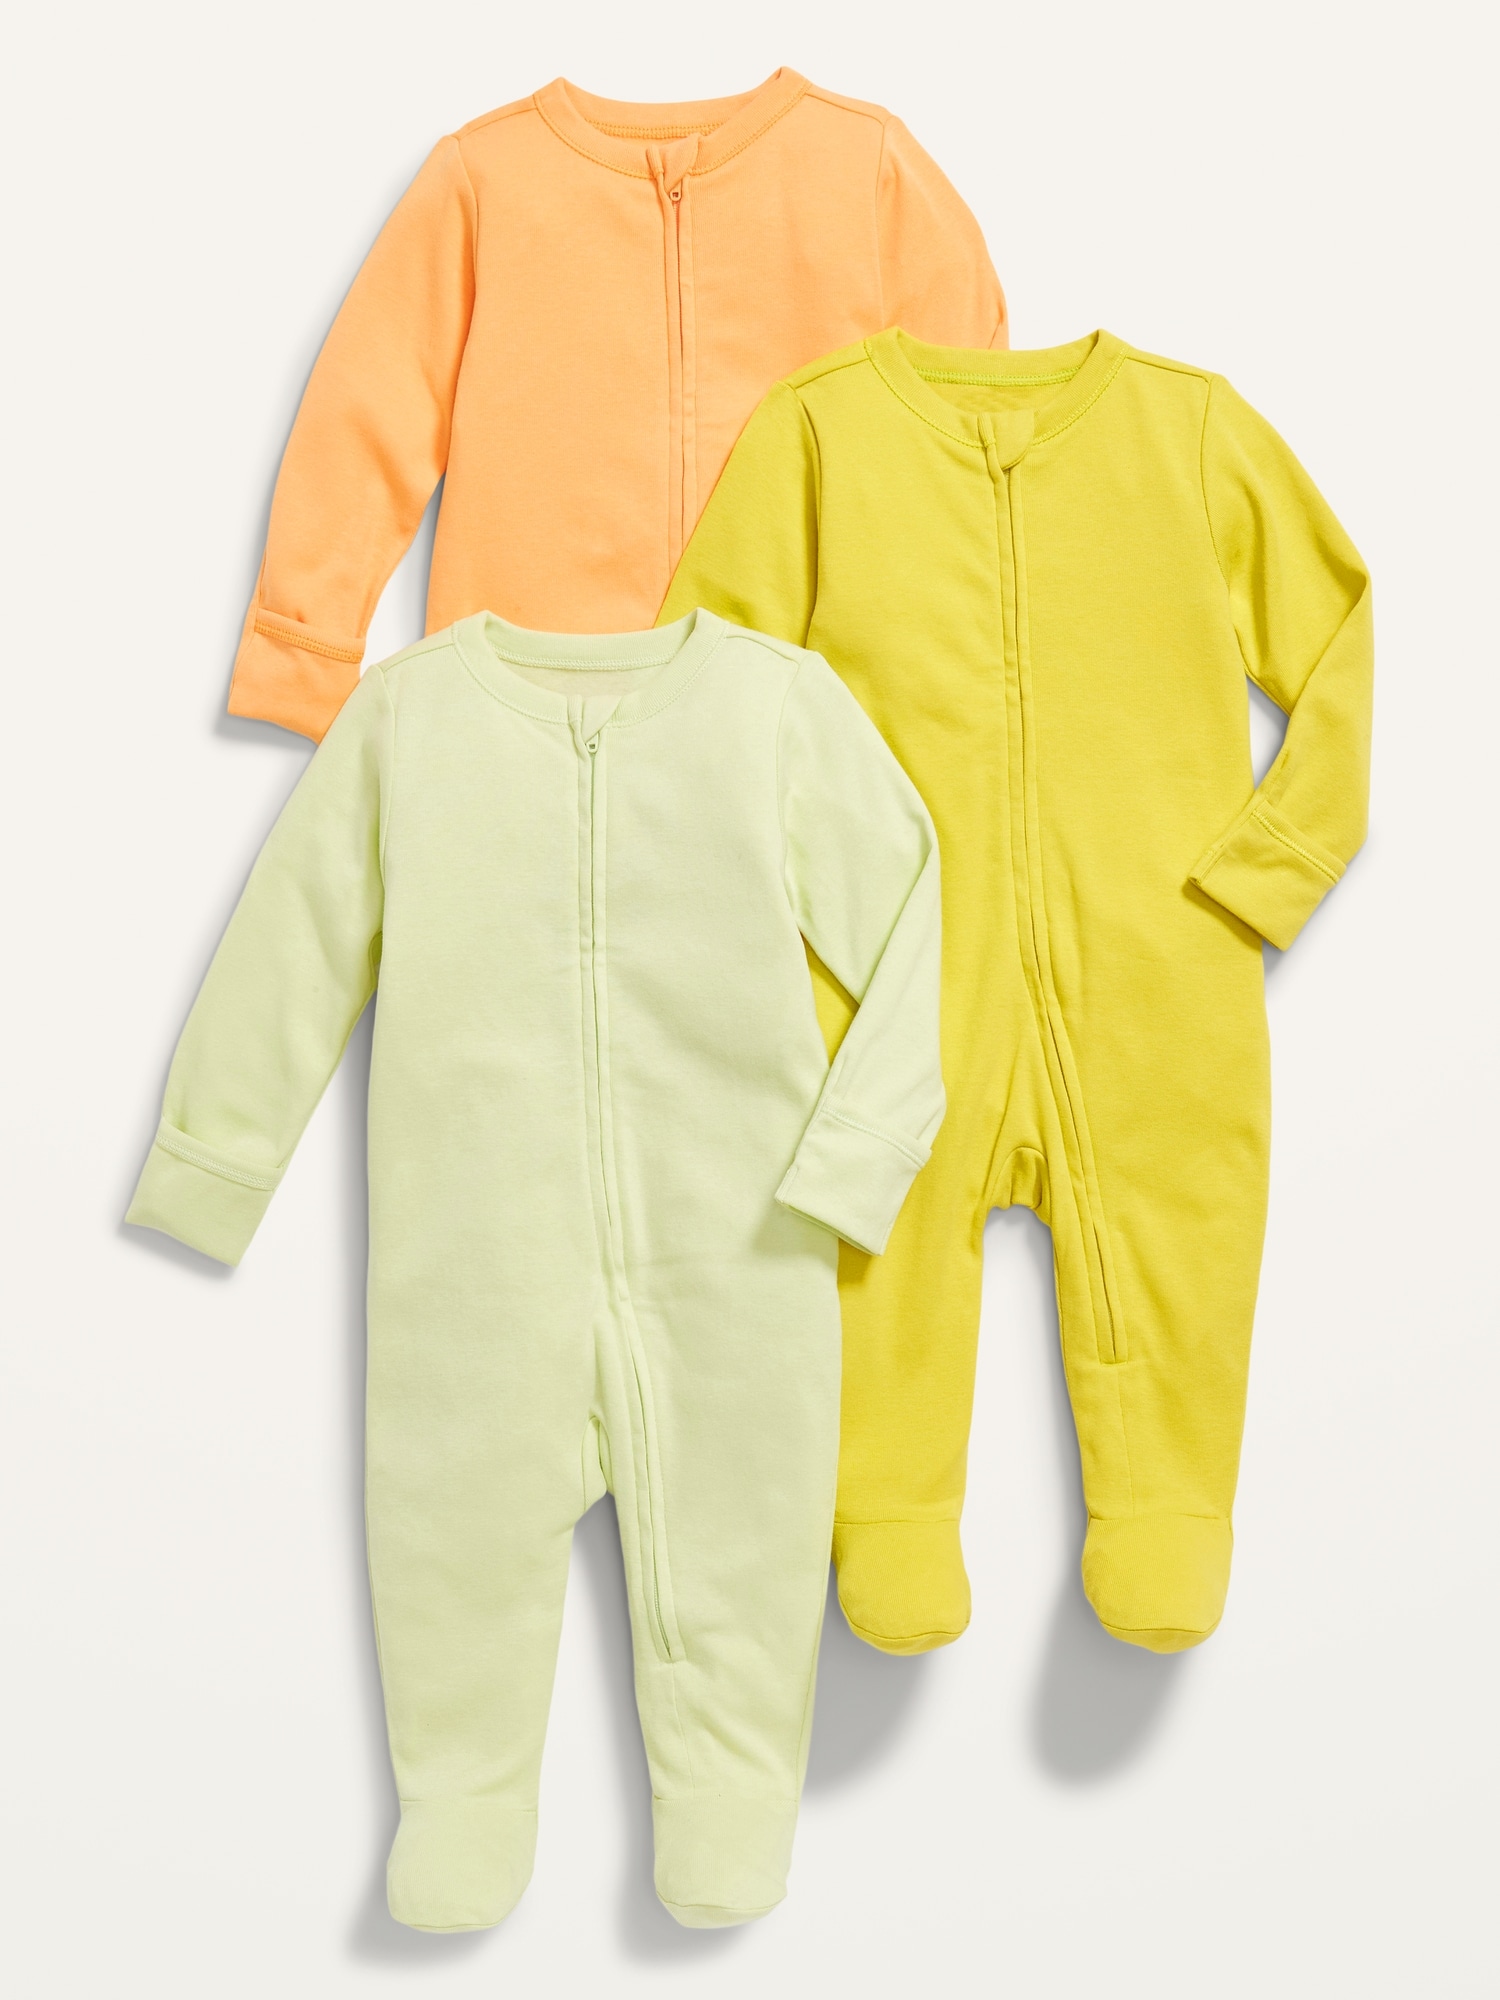 Old Navy Unisex 1-Way Zip Sleep & Play One-Piece 3-Pack for Baby multi. 1